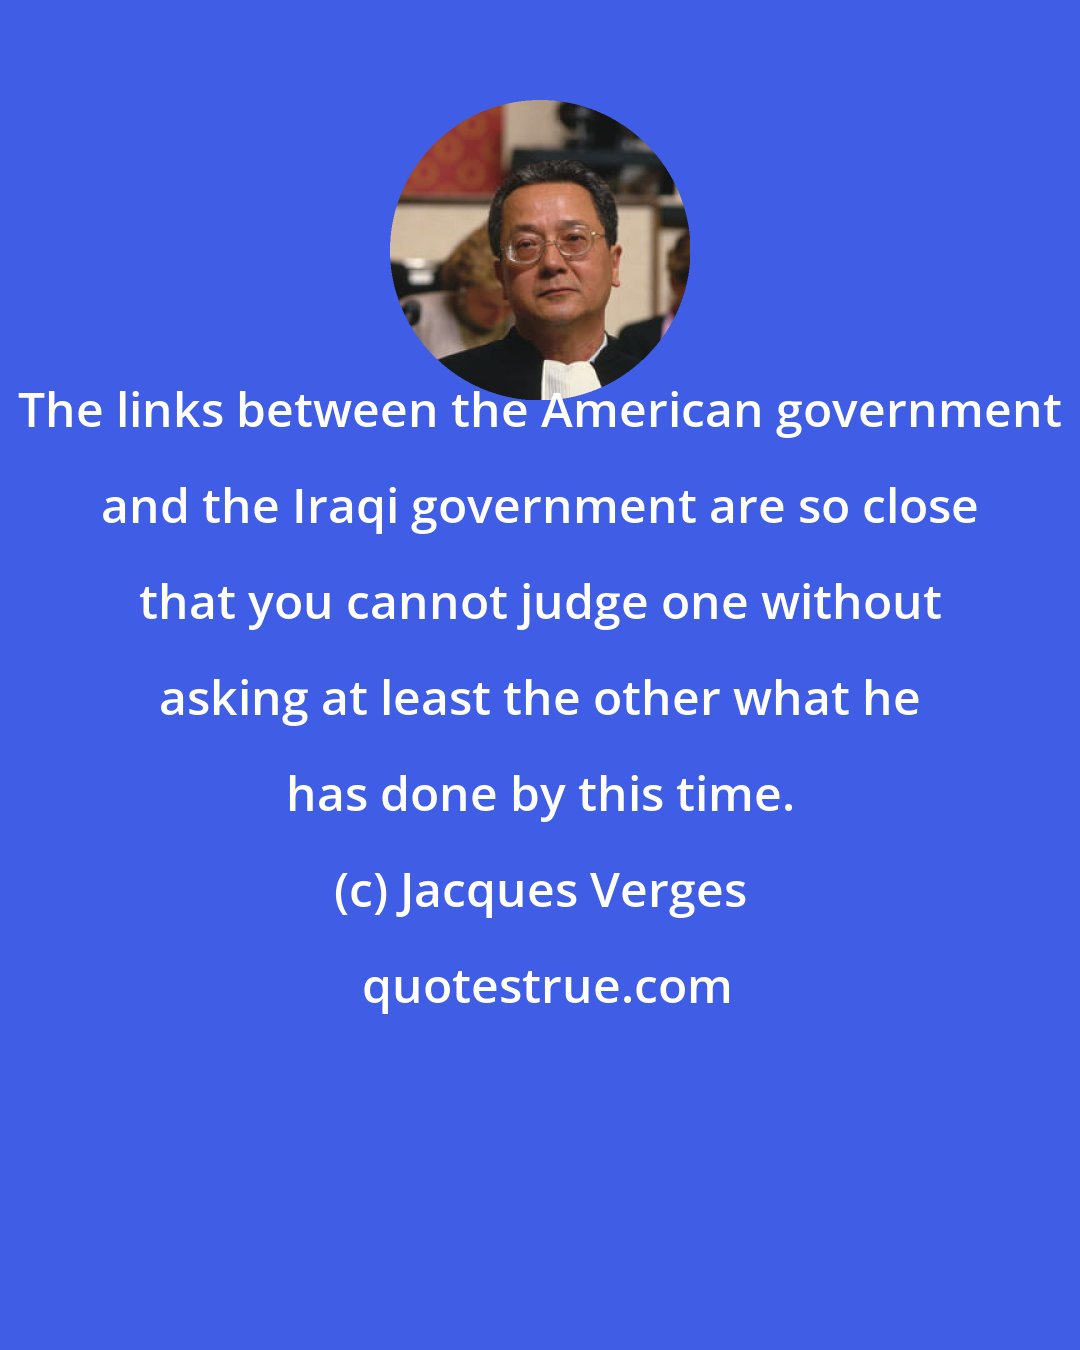 Jacques Verges: The links between the American government and the Iraqi government are so close that you cannot judge one without asking at least the other what he has done by this time.